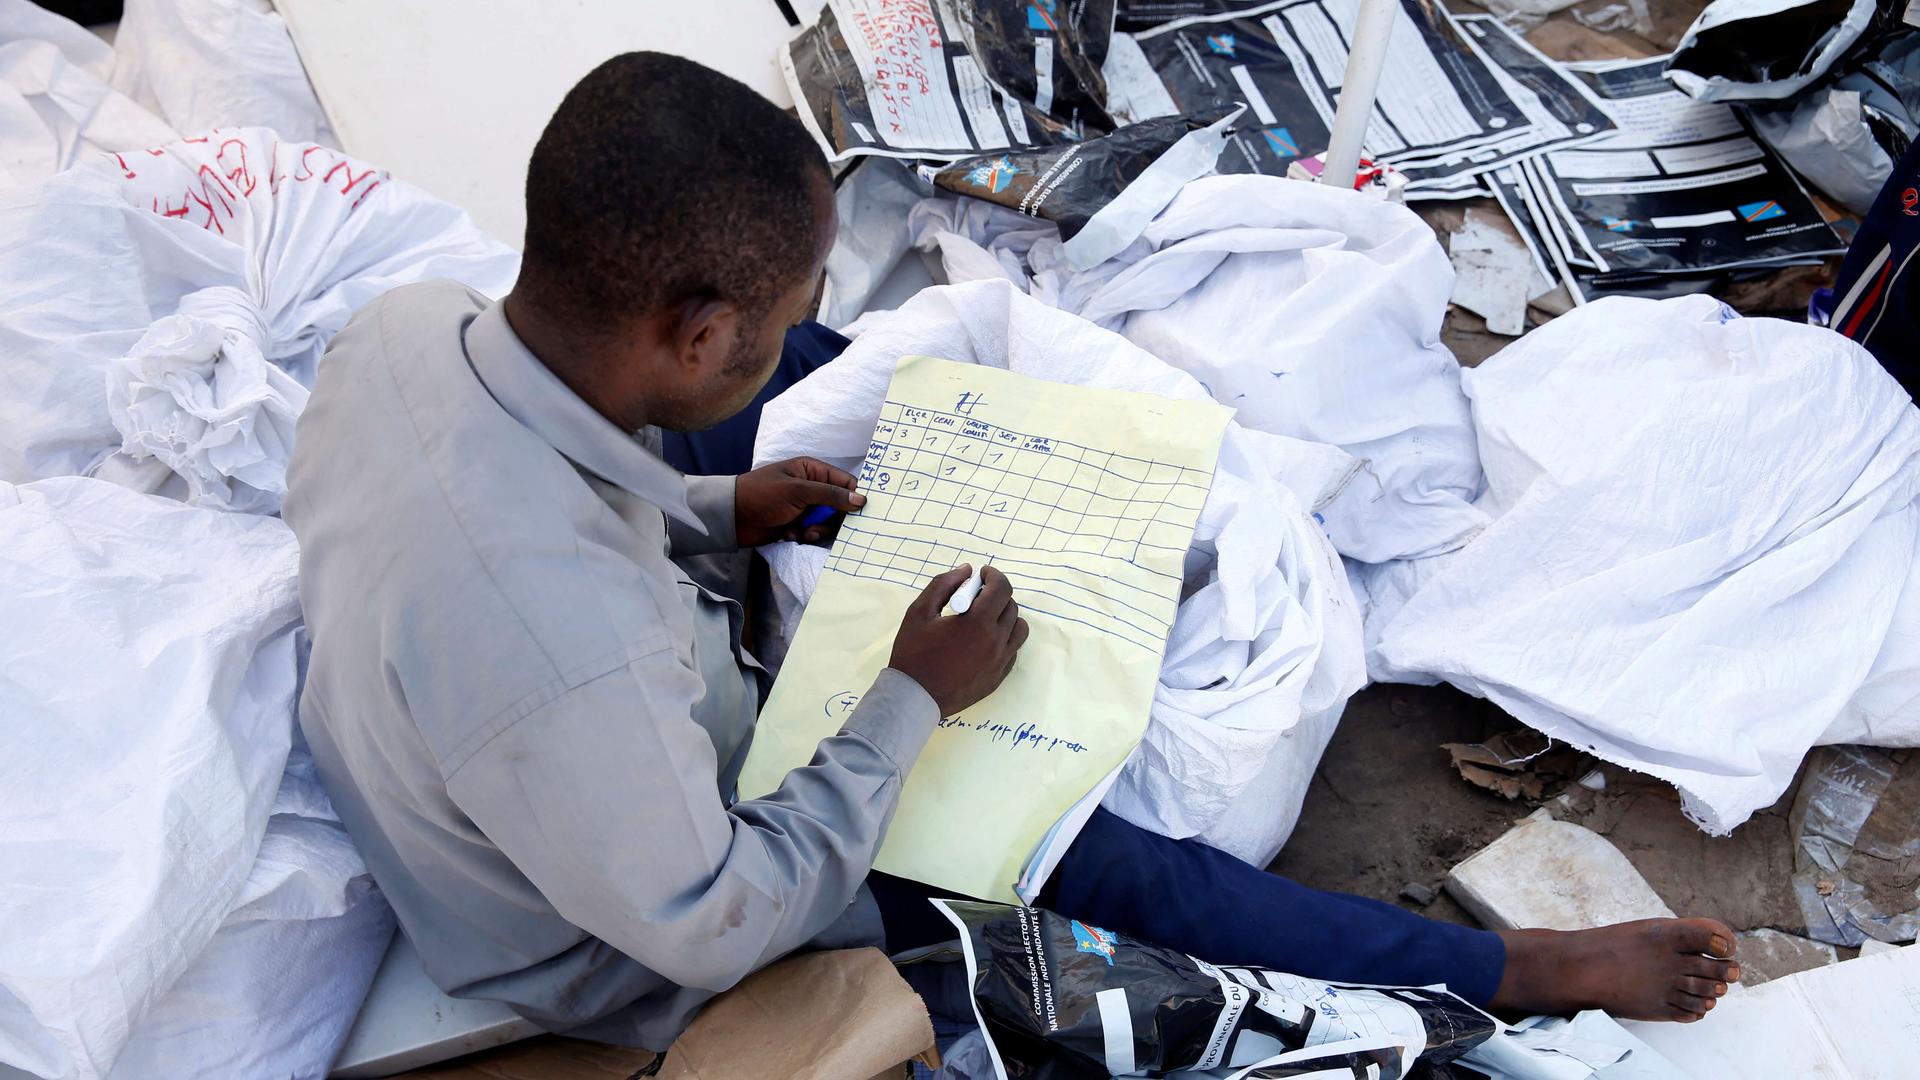 a man without shoes, sits on a big pile of papers while he examines voting materials 